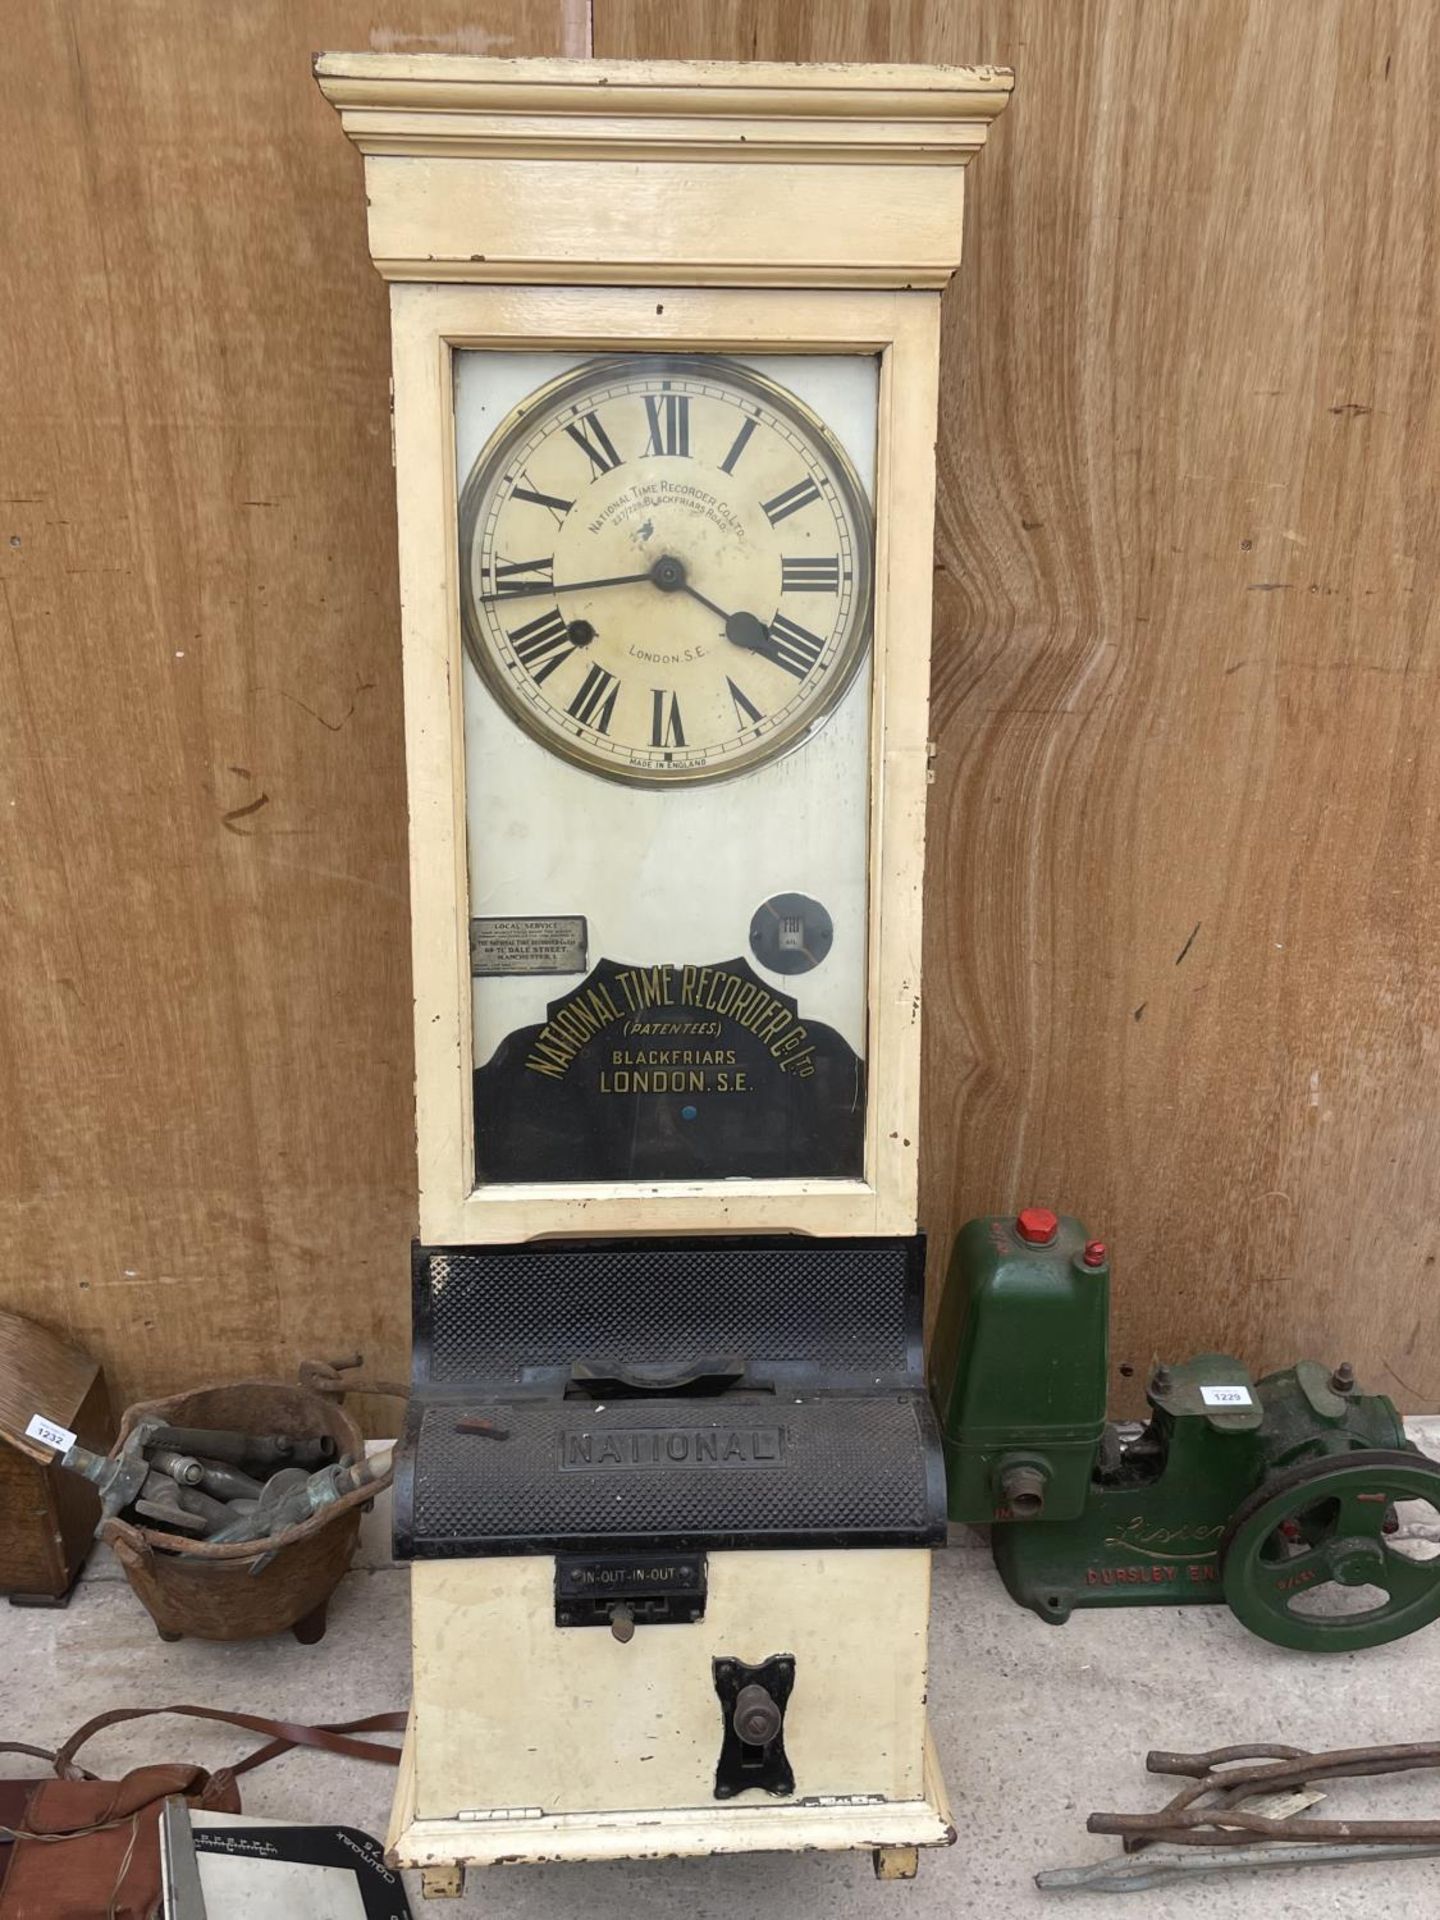 A NATIONAL TIME RECORDER CO LTD 227/228 BLACKFRIARS ROAD LONDON SE CLOCKING IN/OUT CLOCK